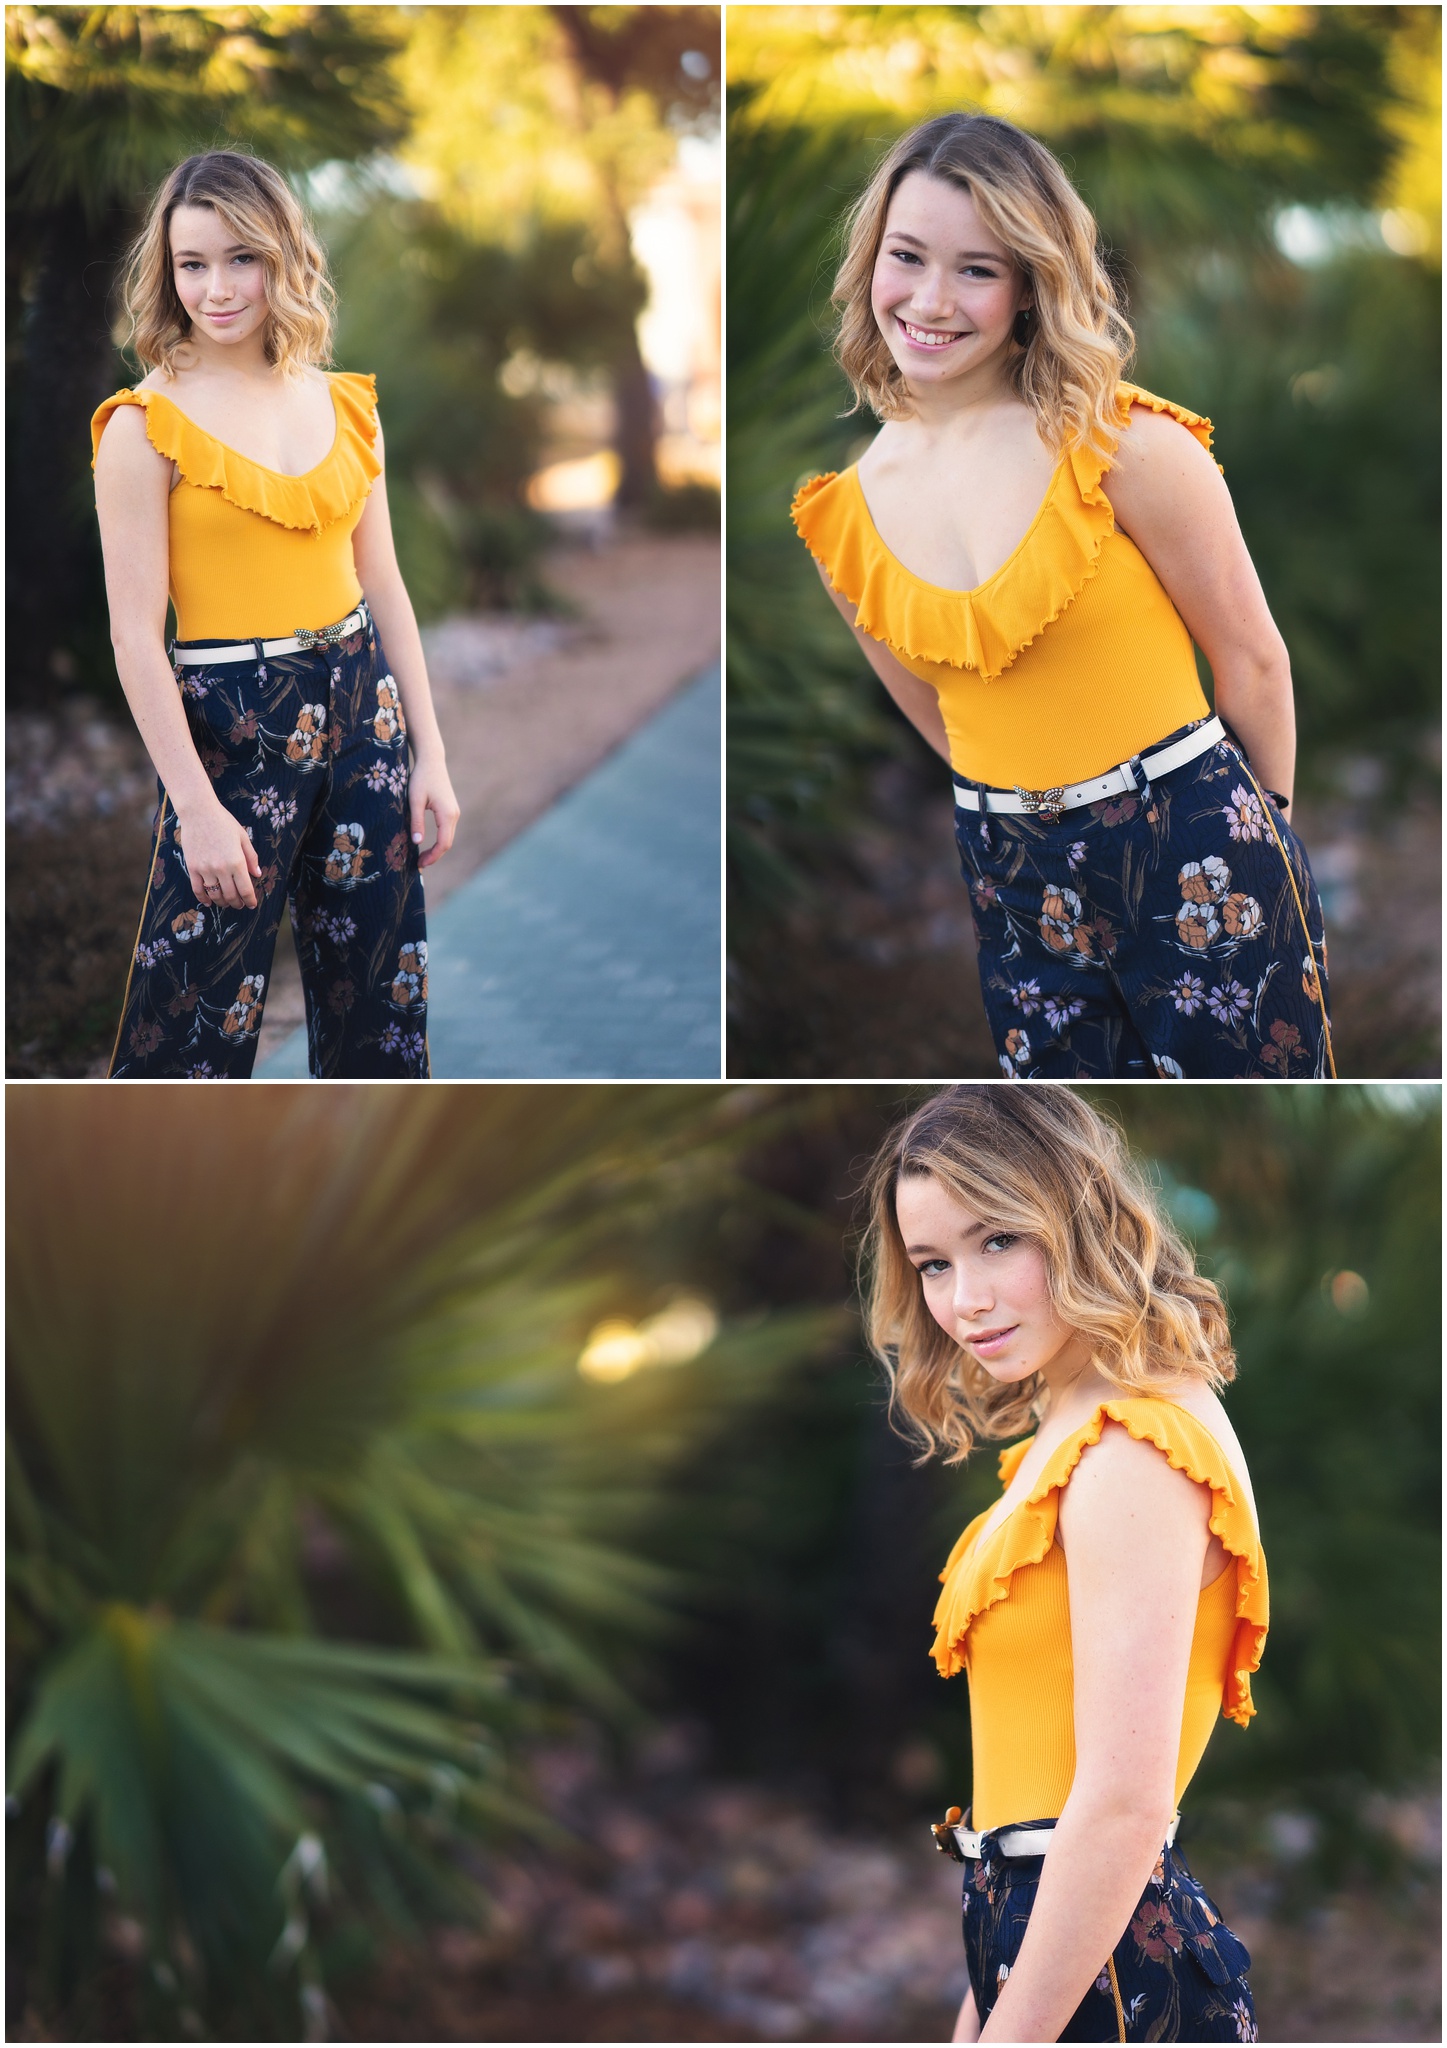 Ava Noble in mustard top with printed pants